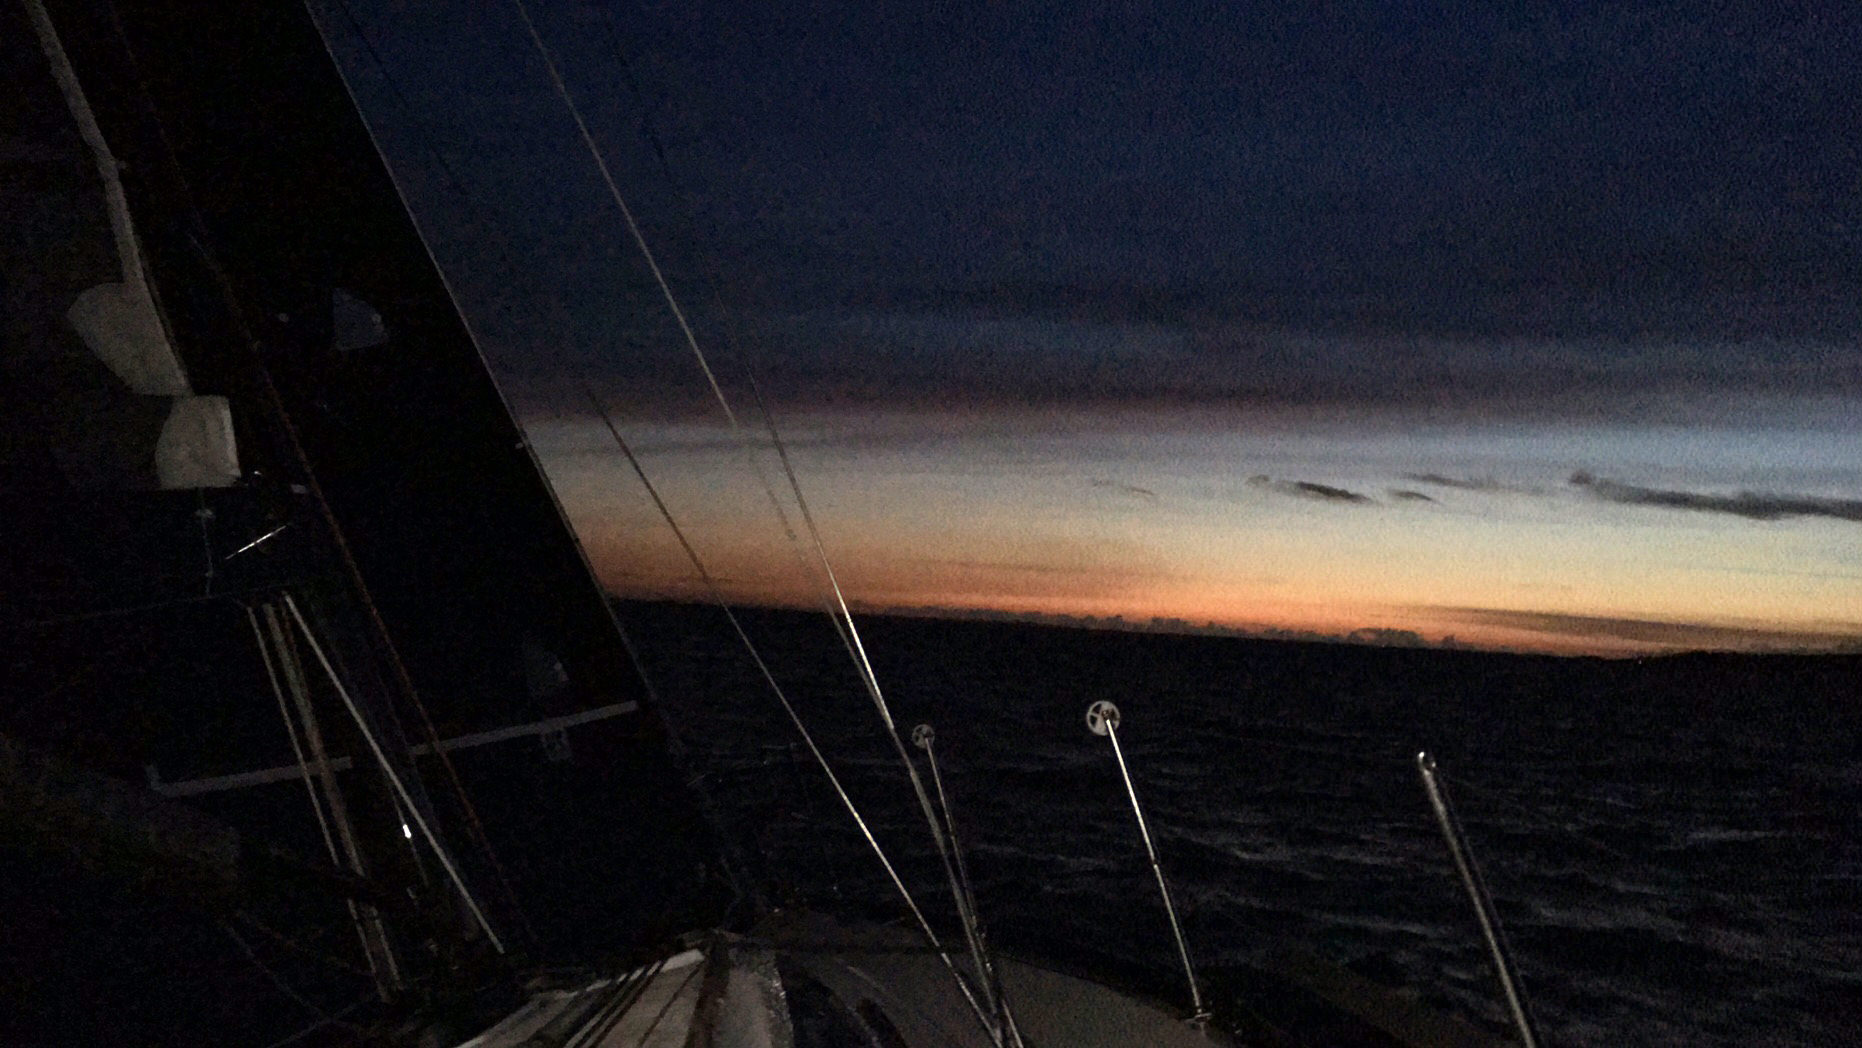 "I had too much adrenaline to get sleepy; too much competition to relax. I made five spinnaker changes on a tight reach between midnight and 0600, all that moving around kept me awake," said Stefan Voss, skipper of the X332 DOGMATIX.